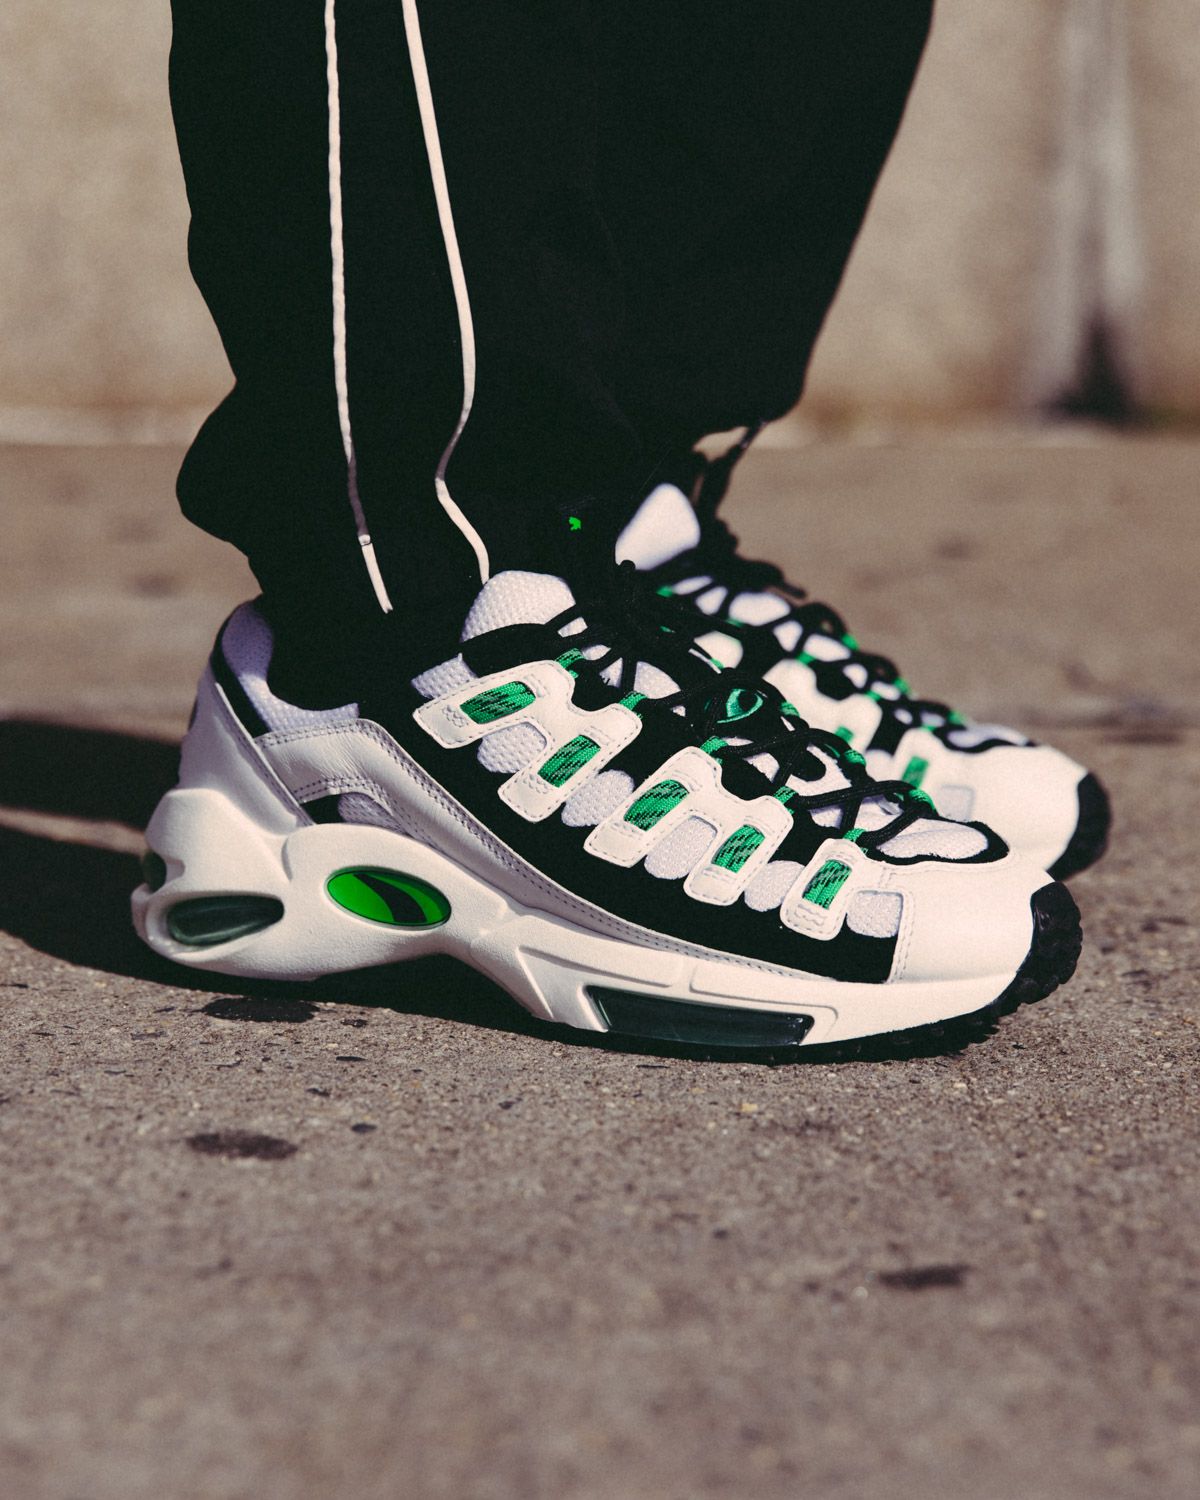 PUMA Revives Another Iconic ‘90s Silhouette: The PUMA CELL Endura